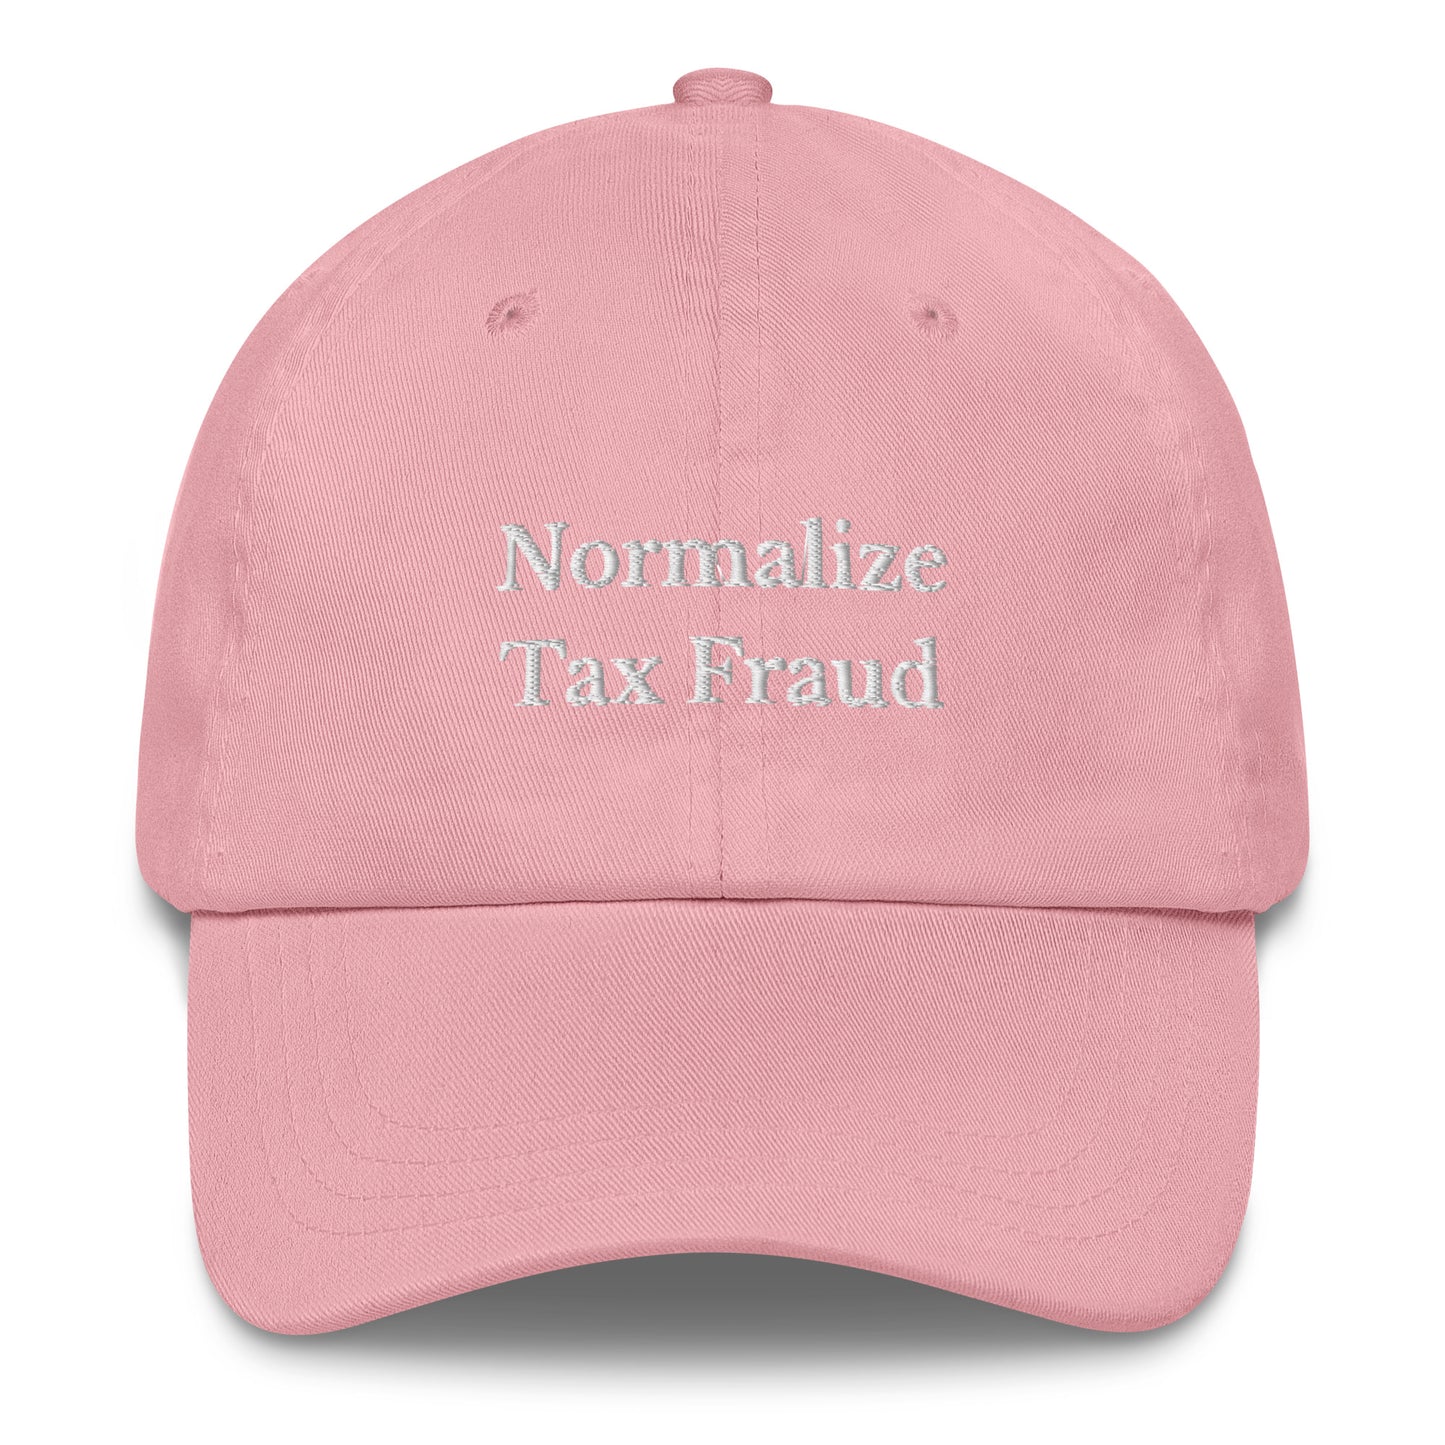 Normalize Tax Fraud Cap